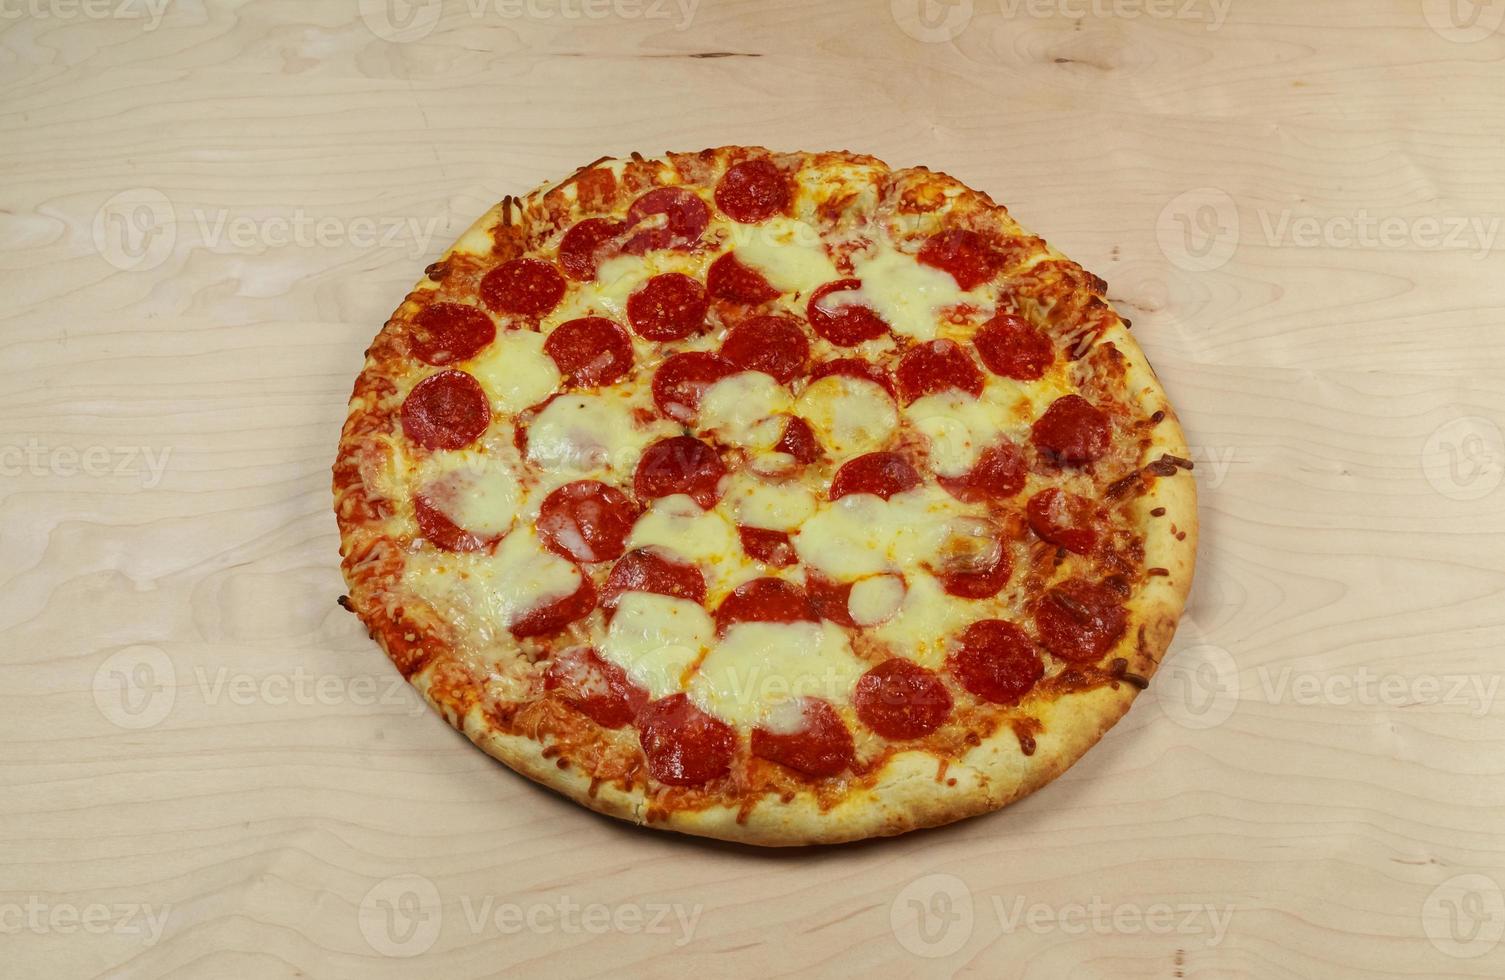 Hands taking pizza cuts - stop motion animation photo